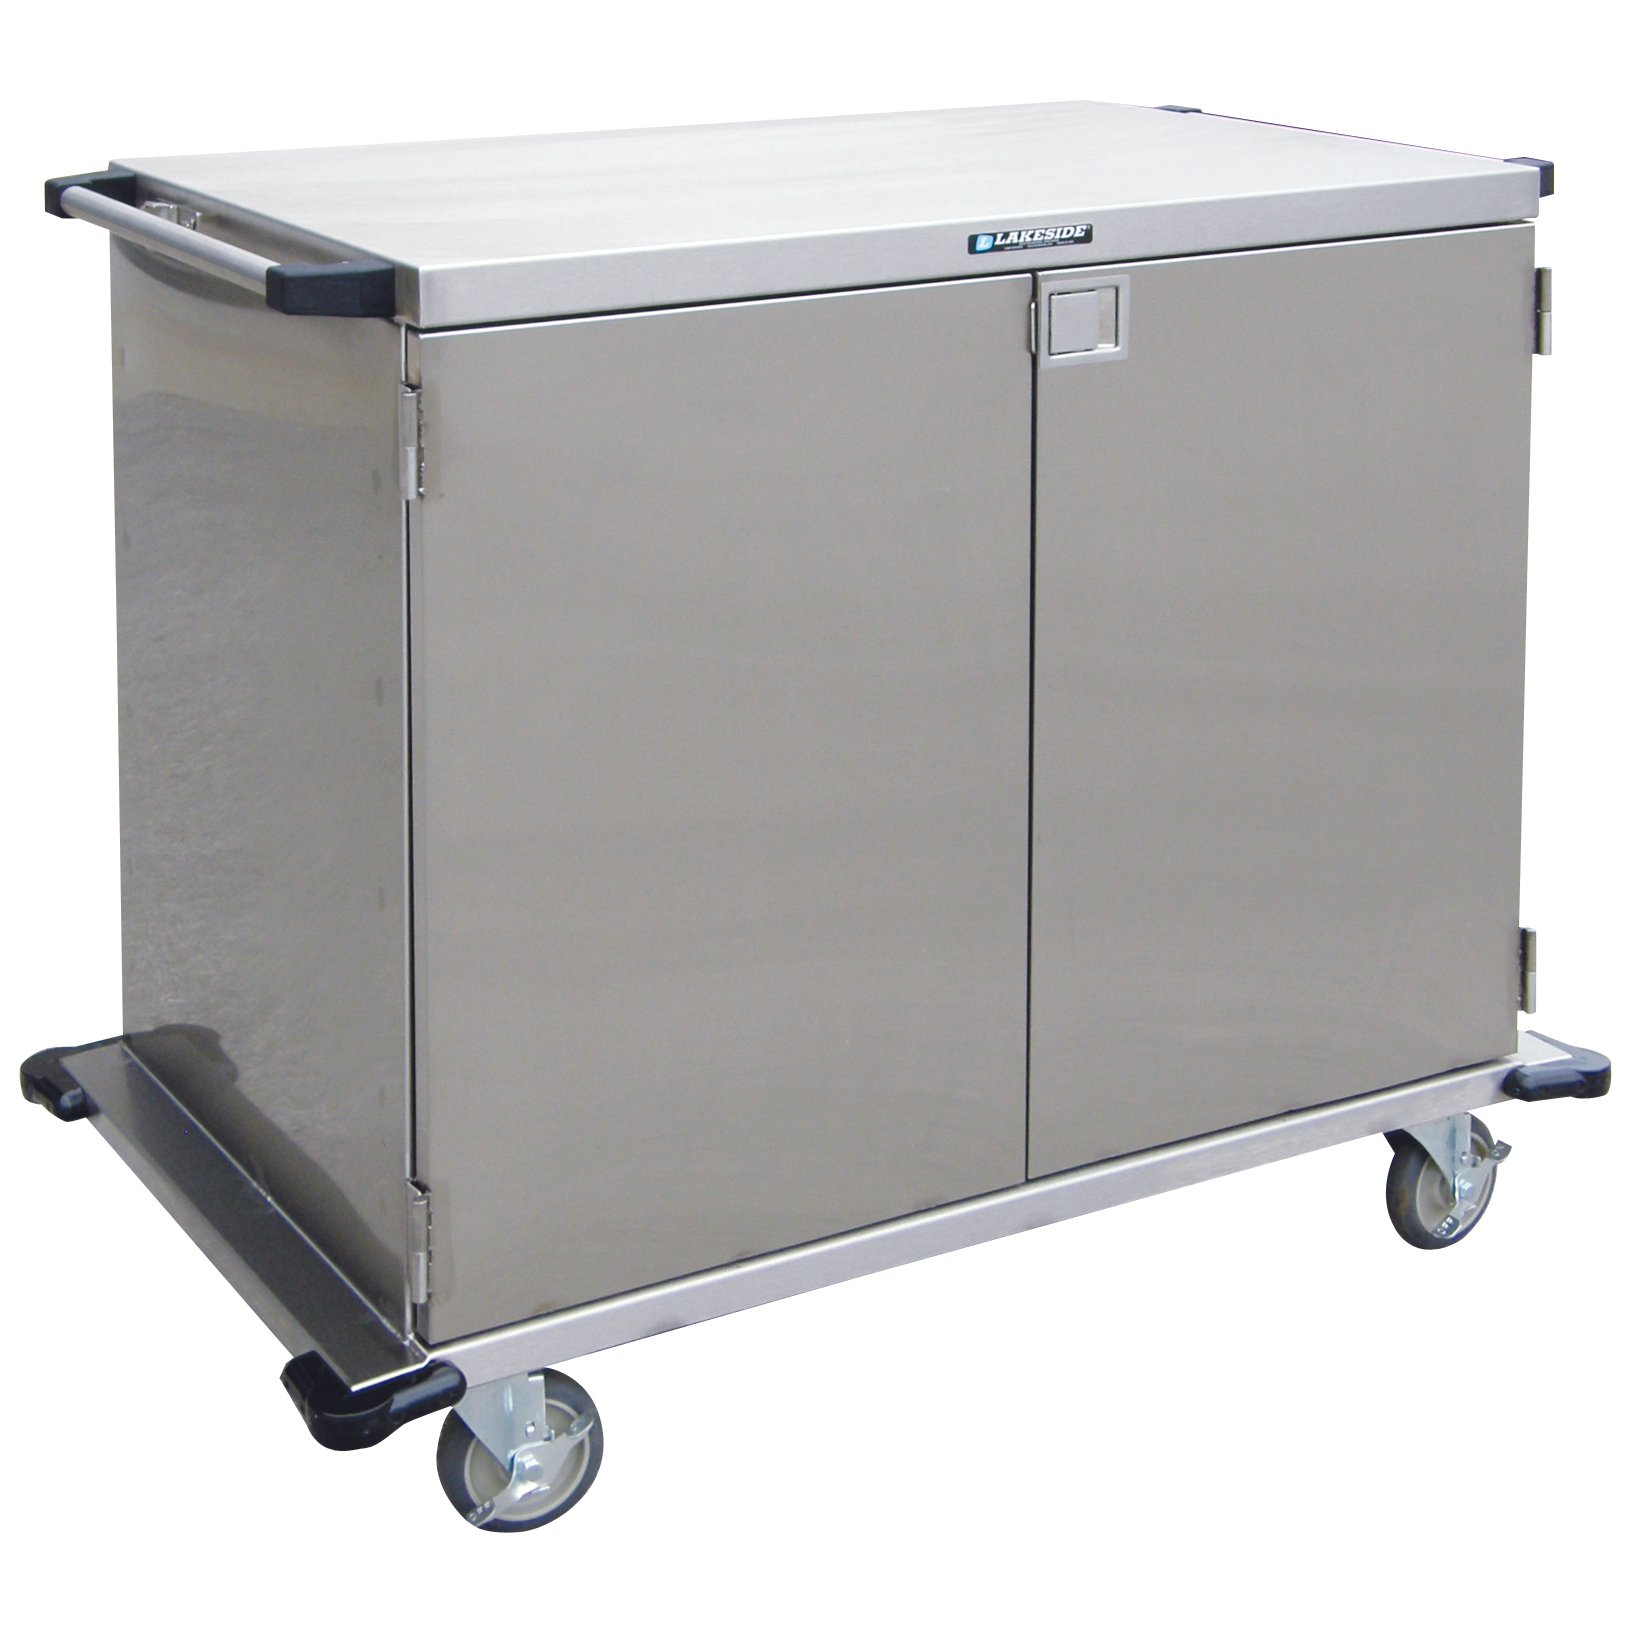 Lakeside Two Door Stainless Steel Case Carts 36" Width Wire Shelf Stainless Steel Cart With Doors